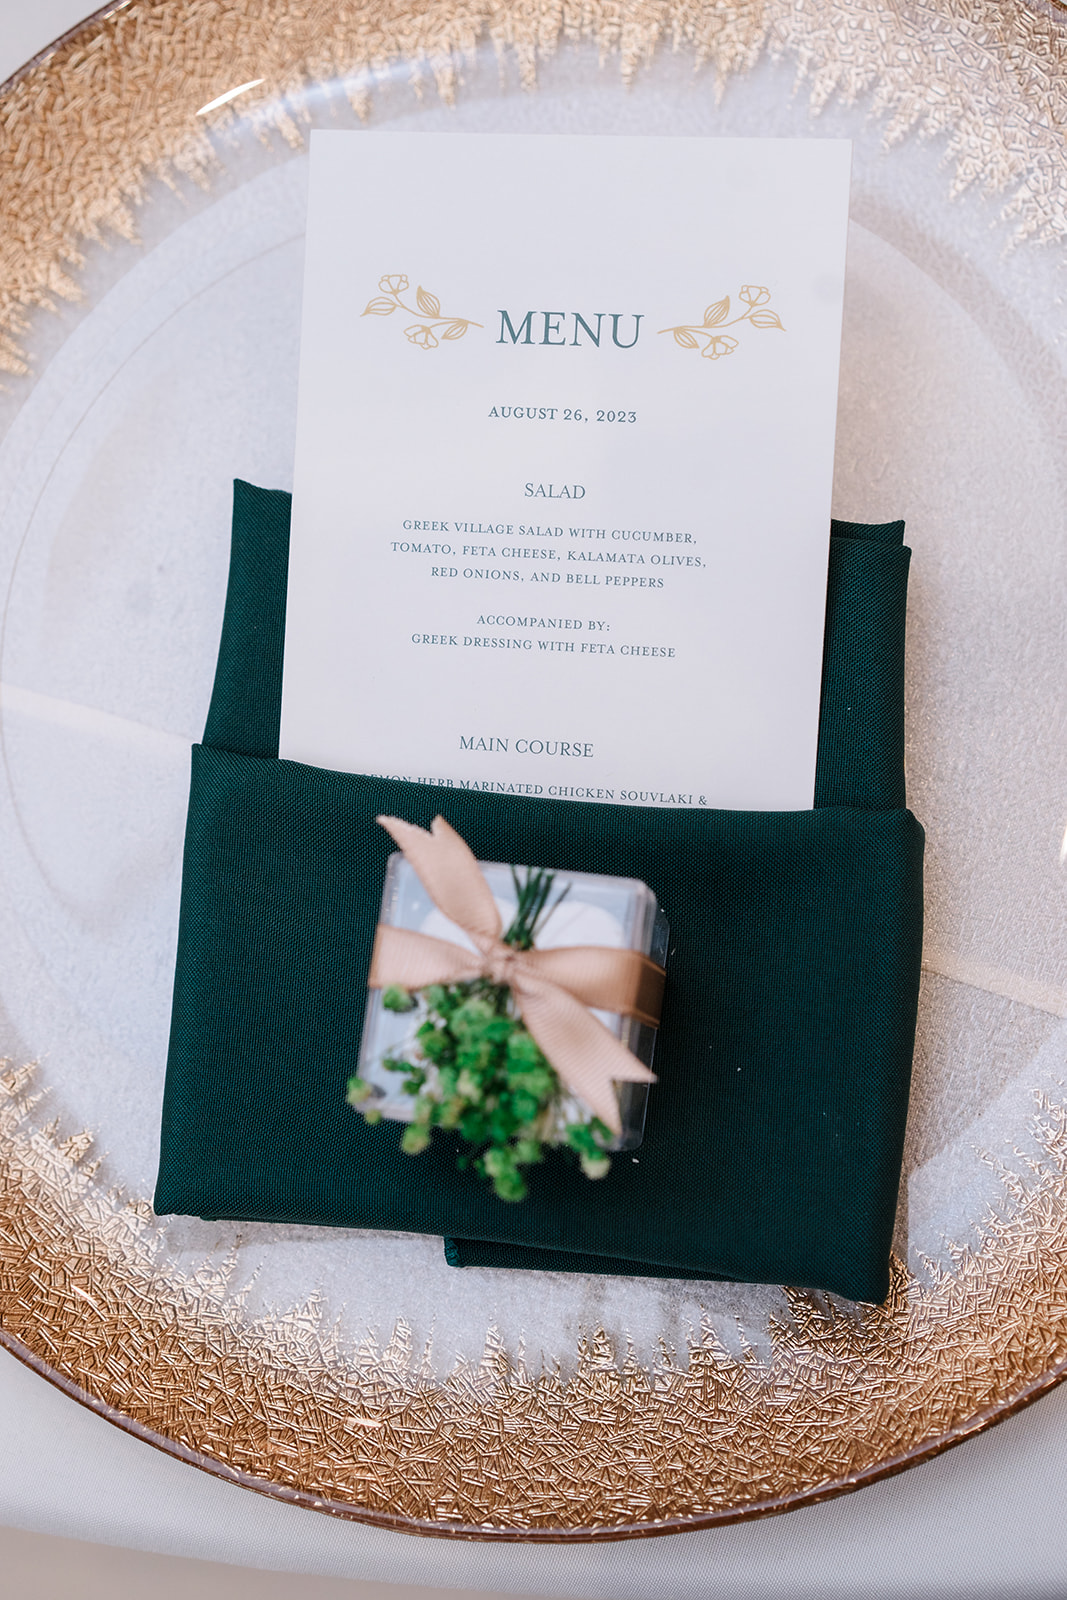 Reception menu card in green napkin on a gold-rimmed charger plate.